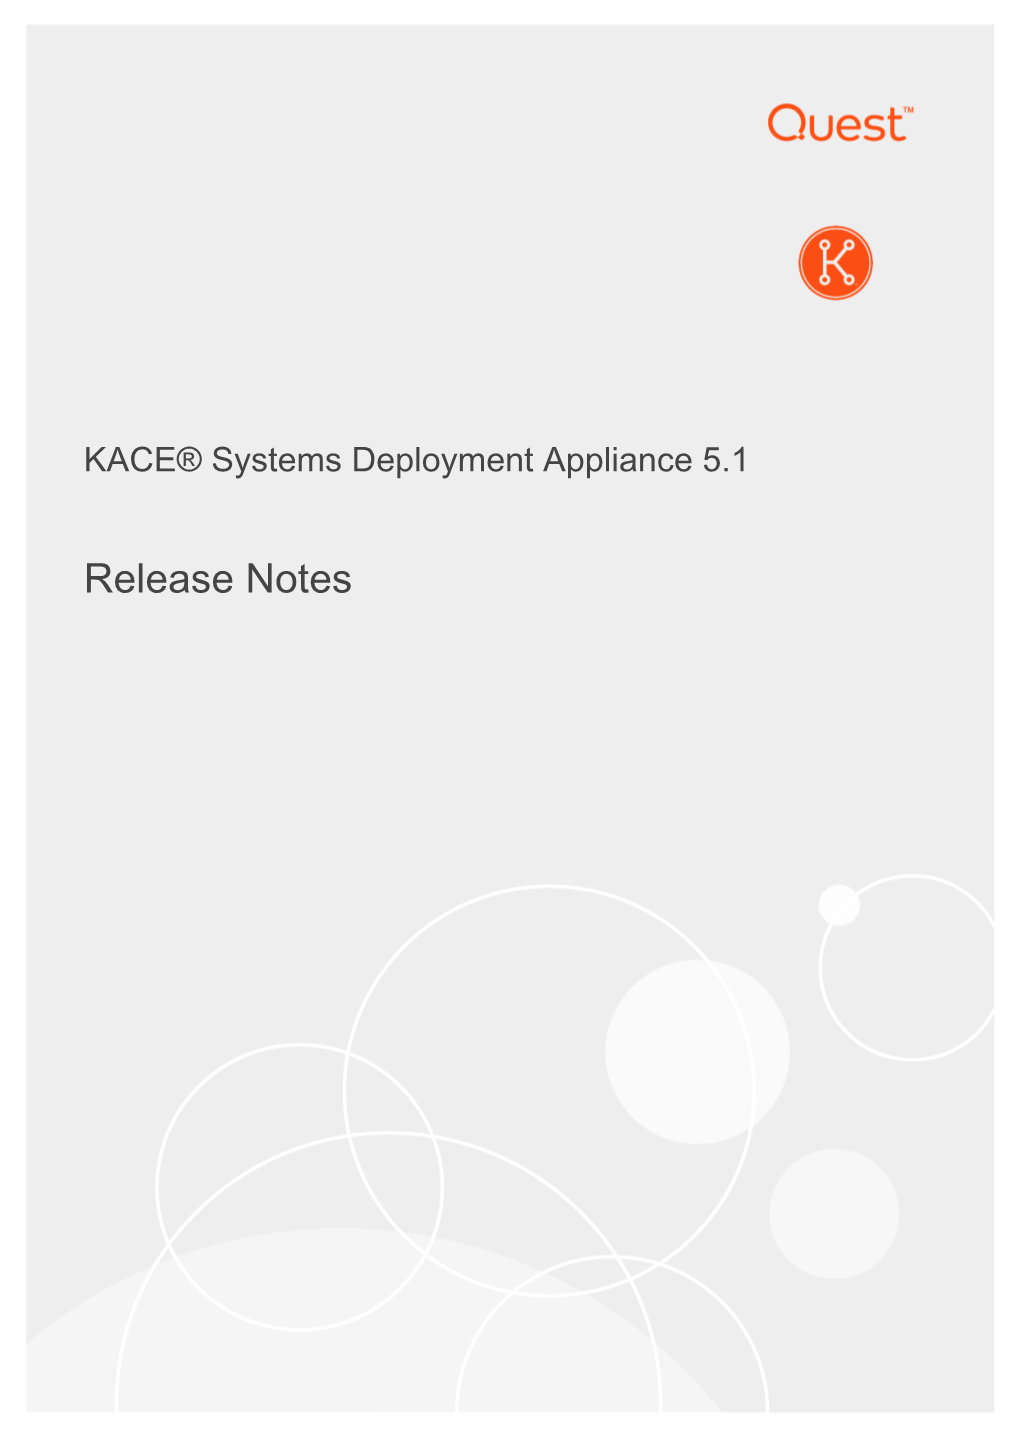 KACE® Systems Deployment Appliance 5.1 Release Notes